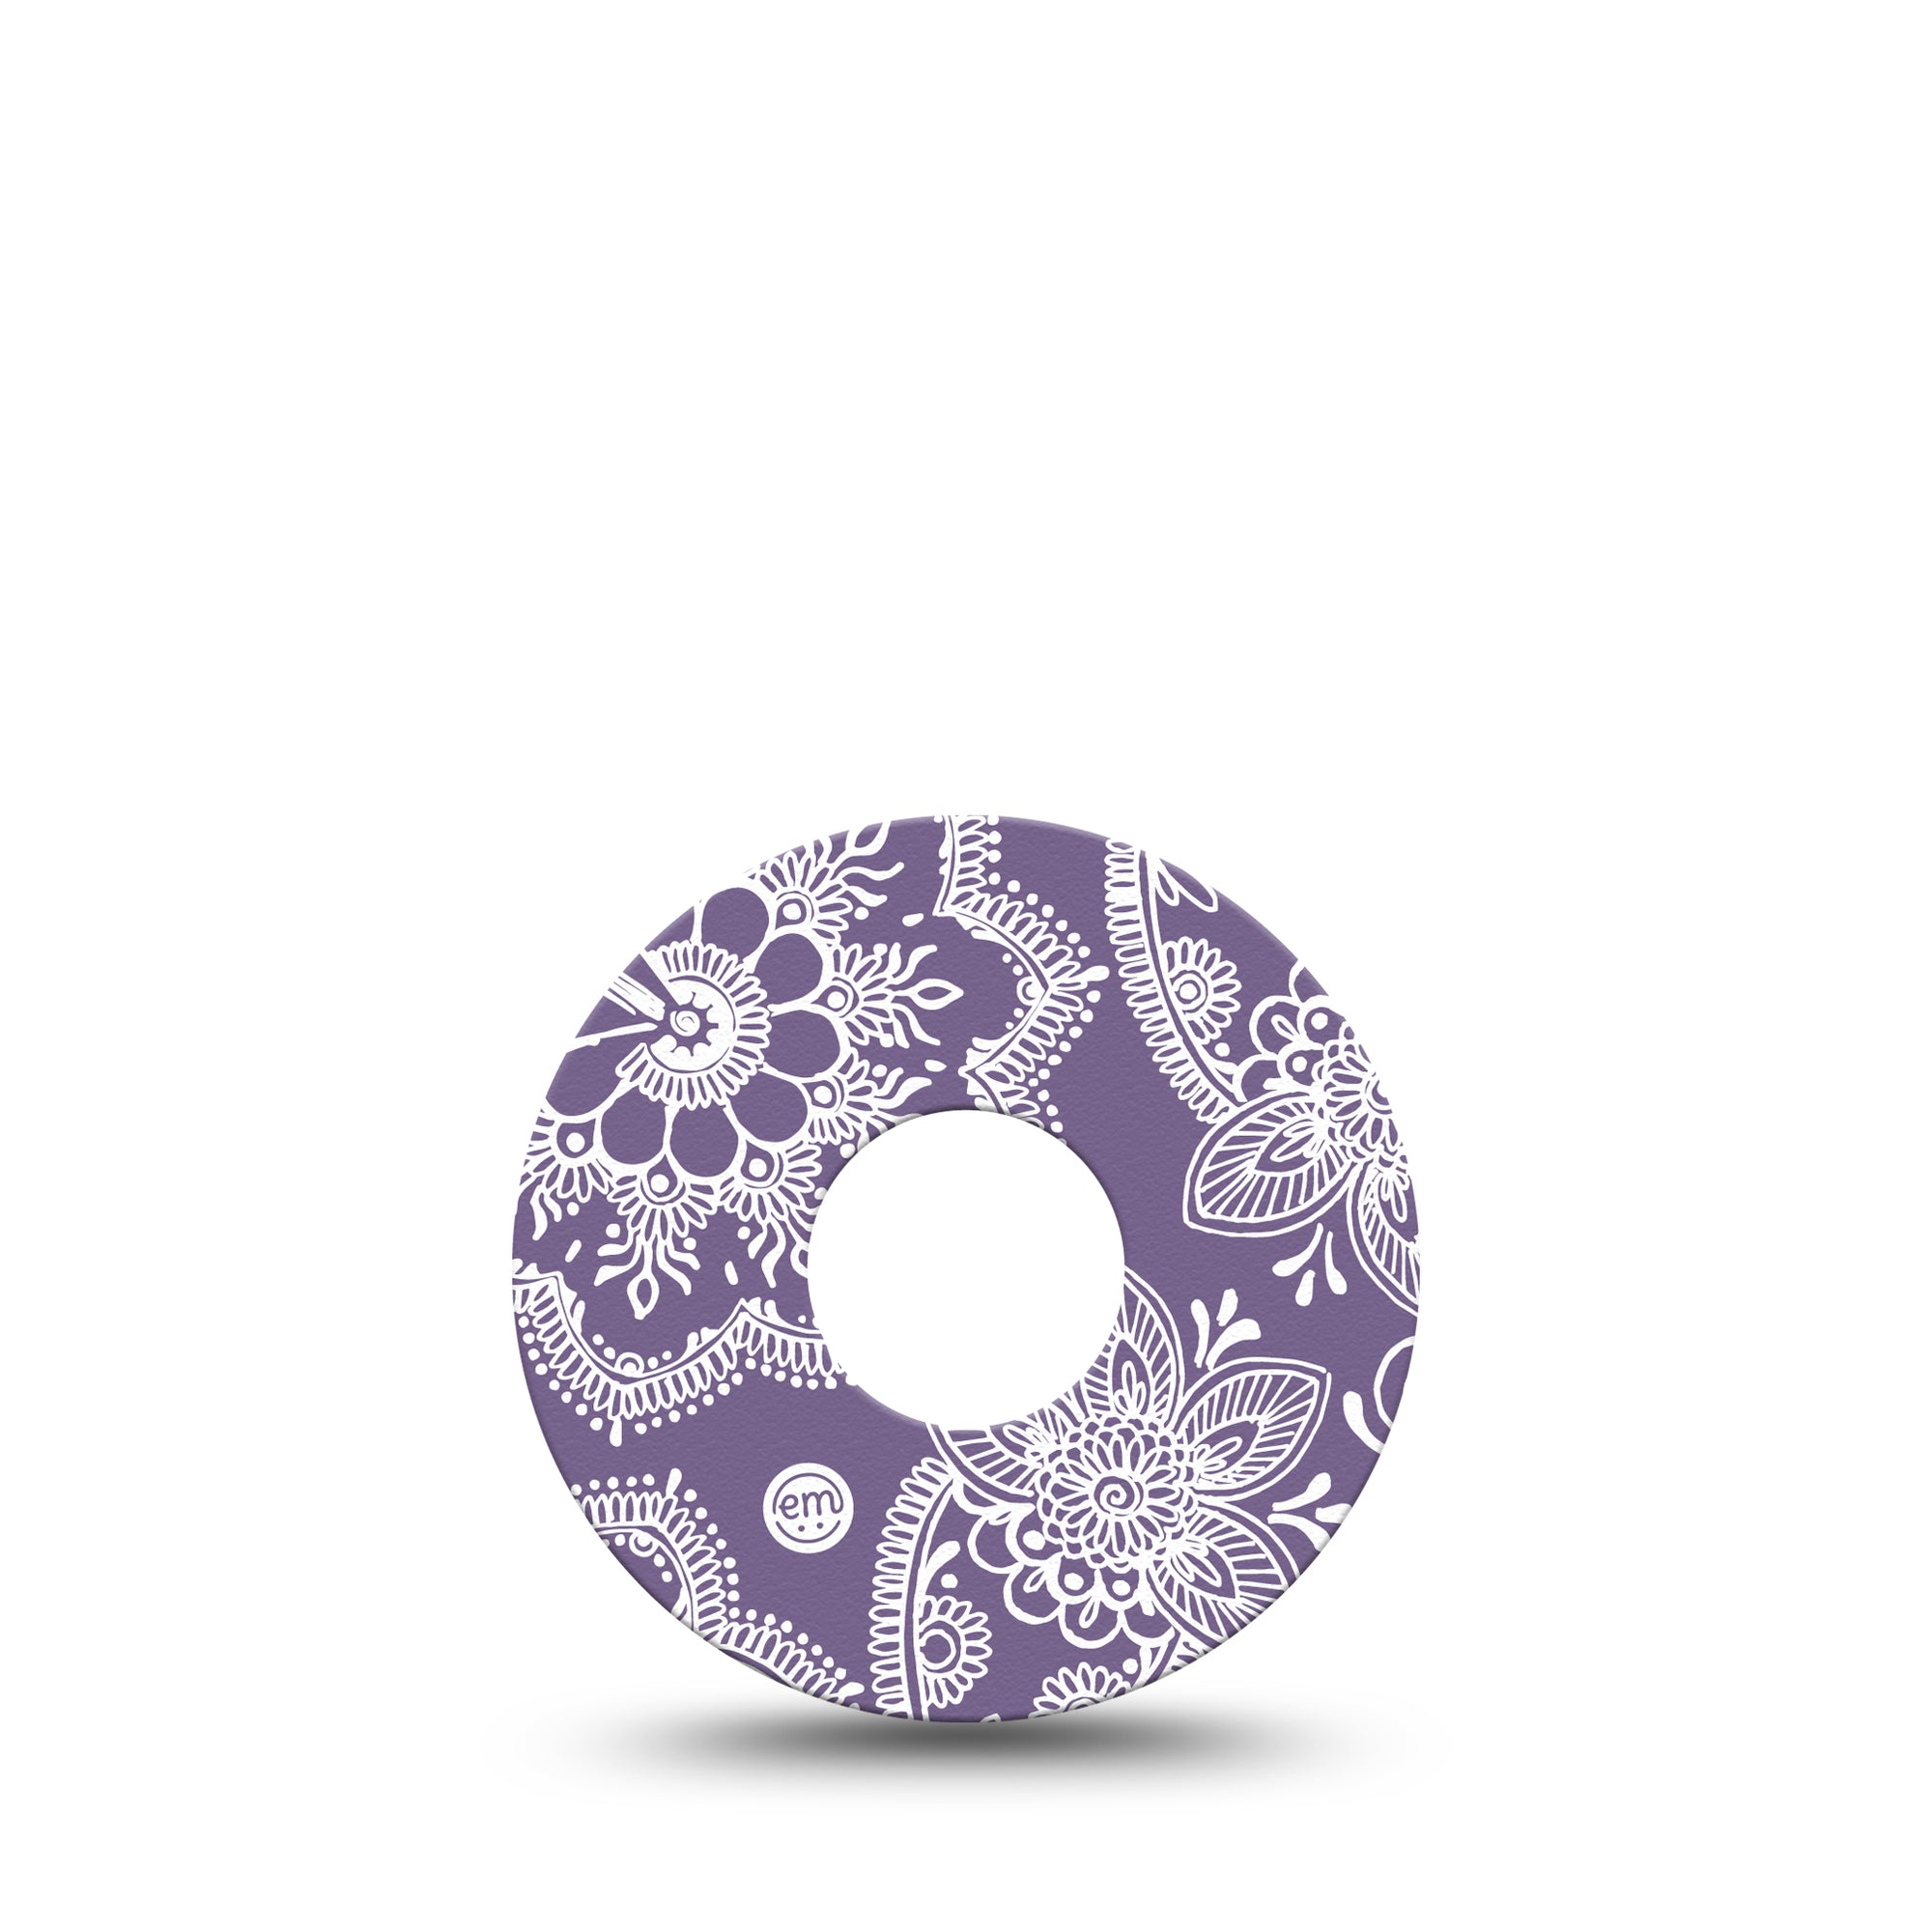 ExpressionMed Purple Henna Libre 3 Tape, Single, Floral Art Inspired, CGM Patch Design